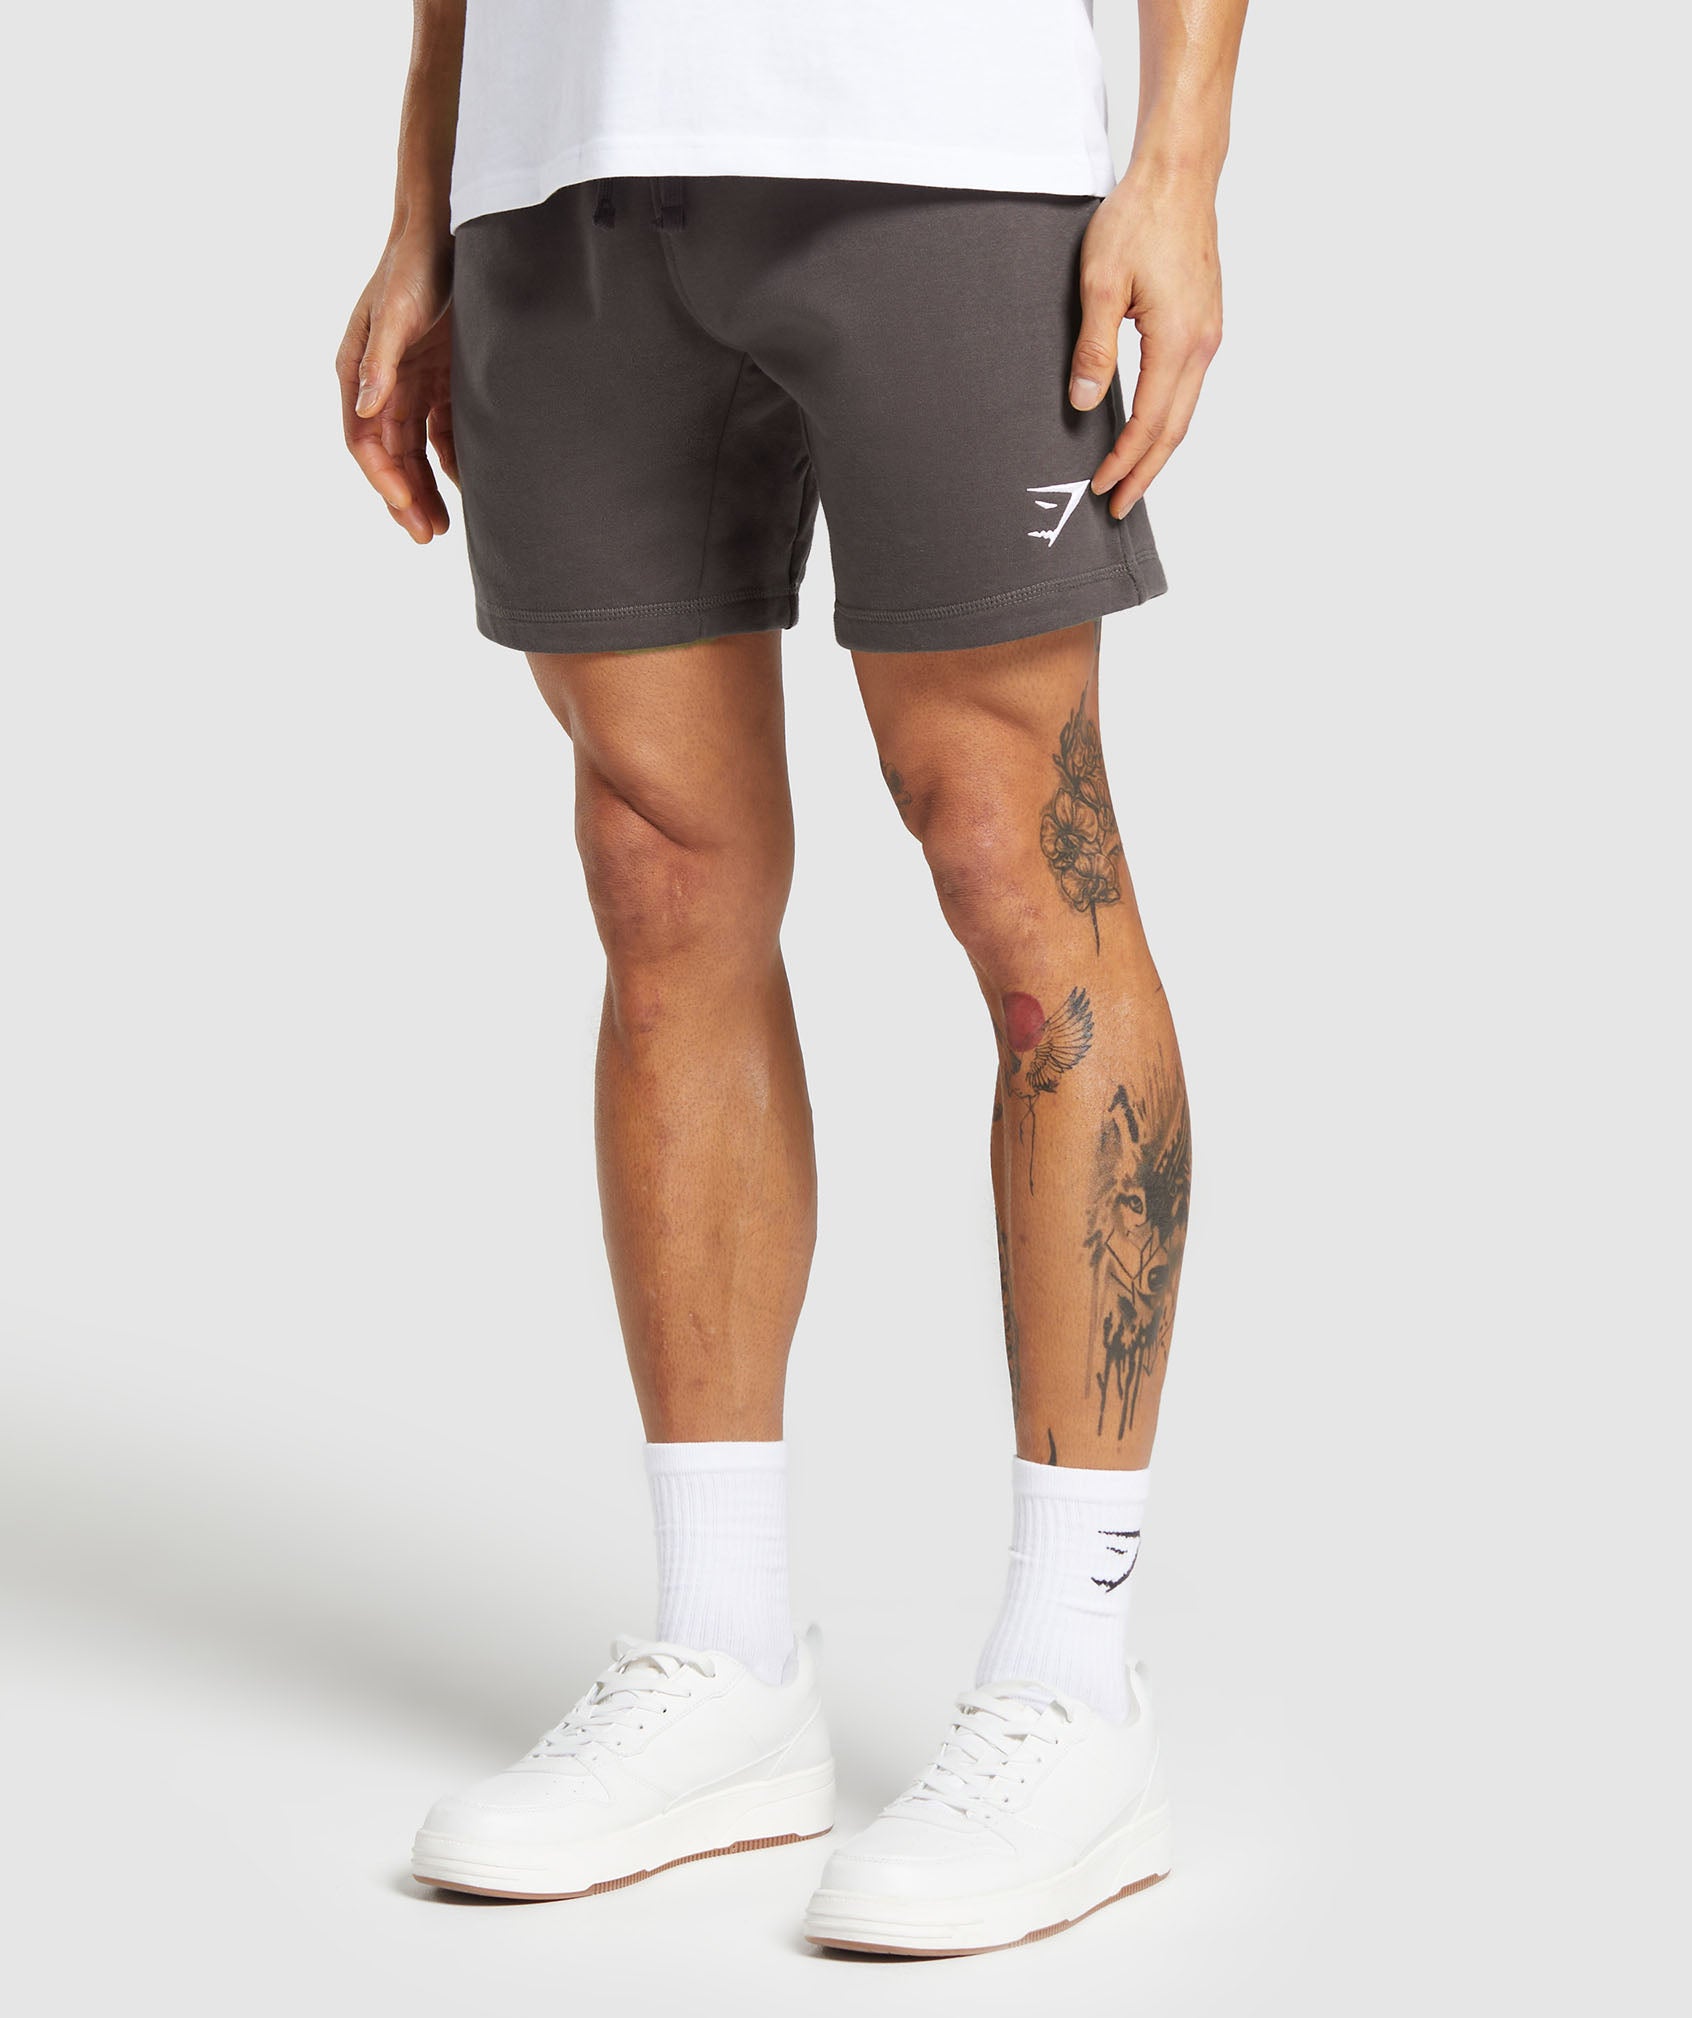 Crest 7" Shorts in Greyed Purple - view 3